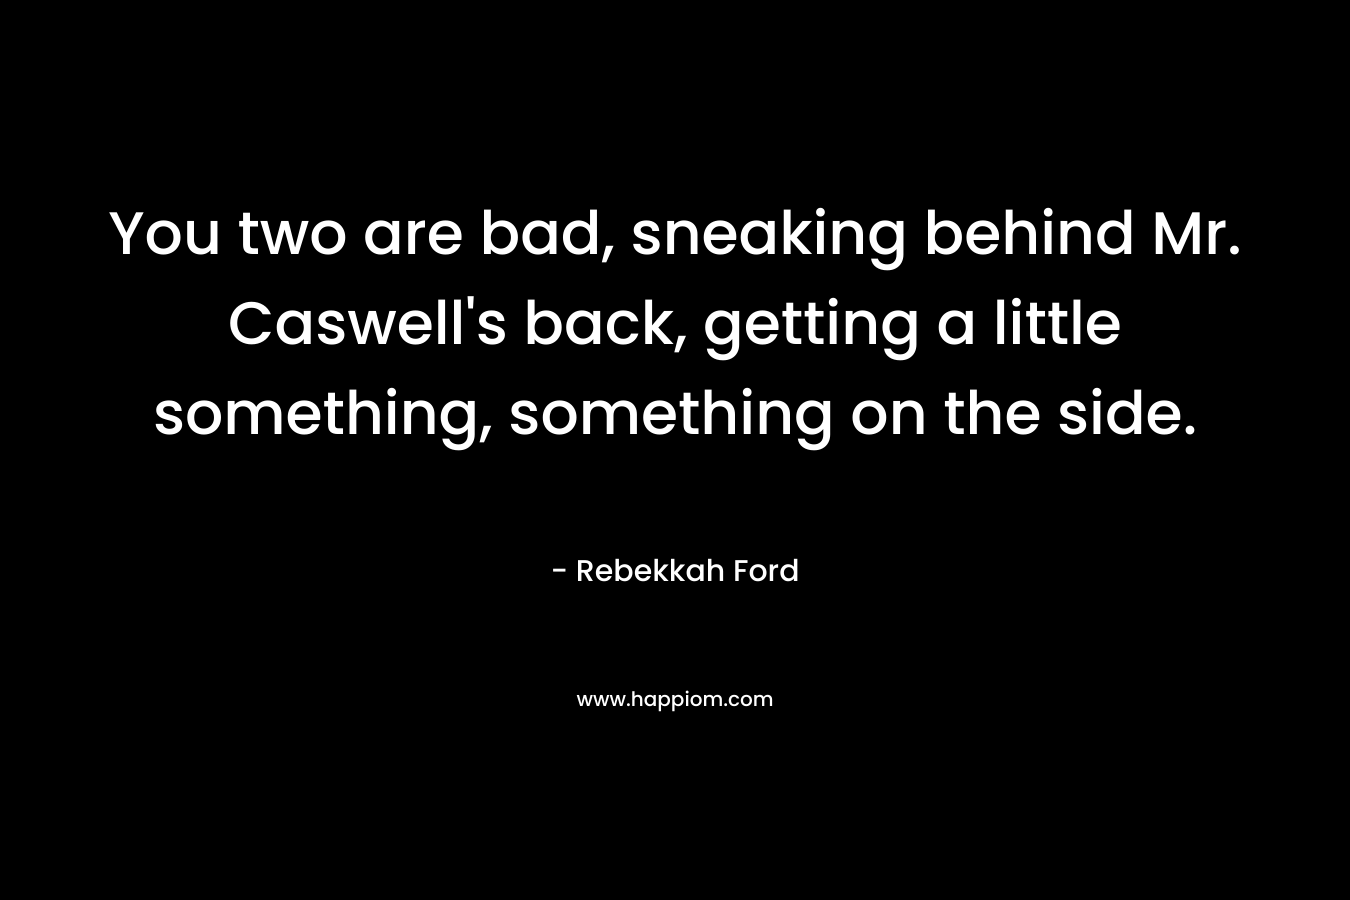 You two are bad, sneaking behind Mr. Caswell’s back, getting a little something, something on the side. – Rebekkah Ford